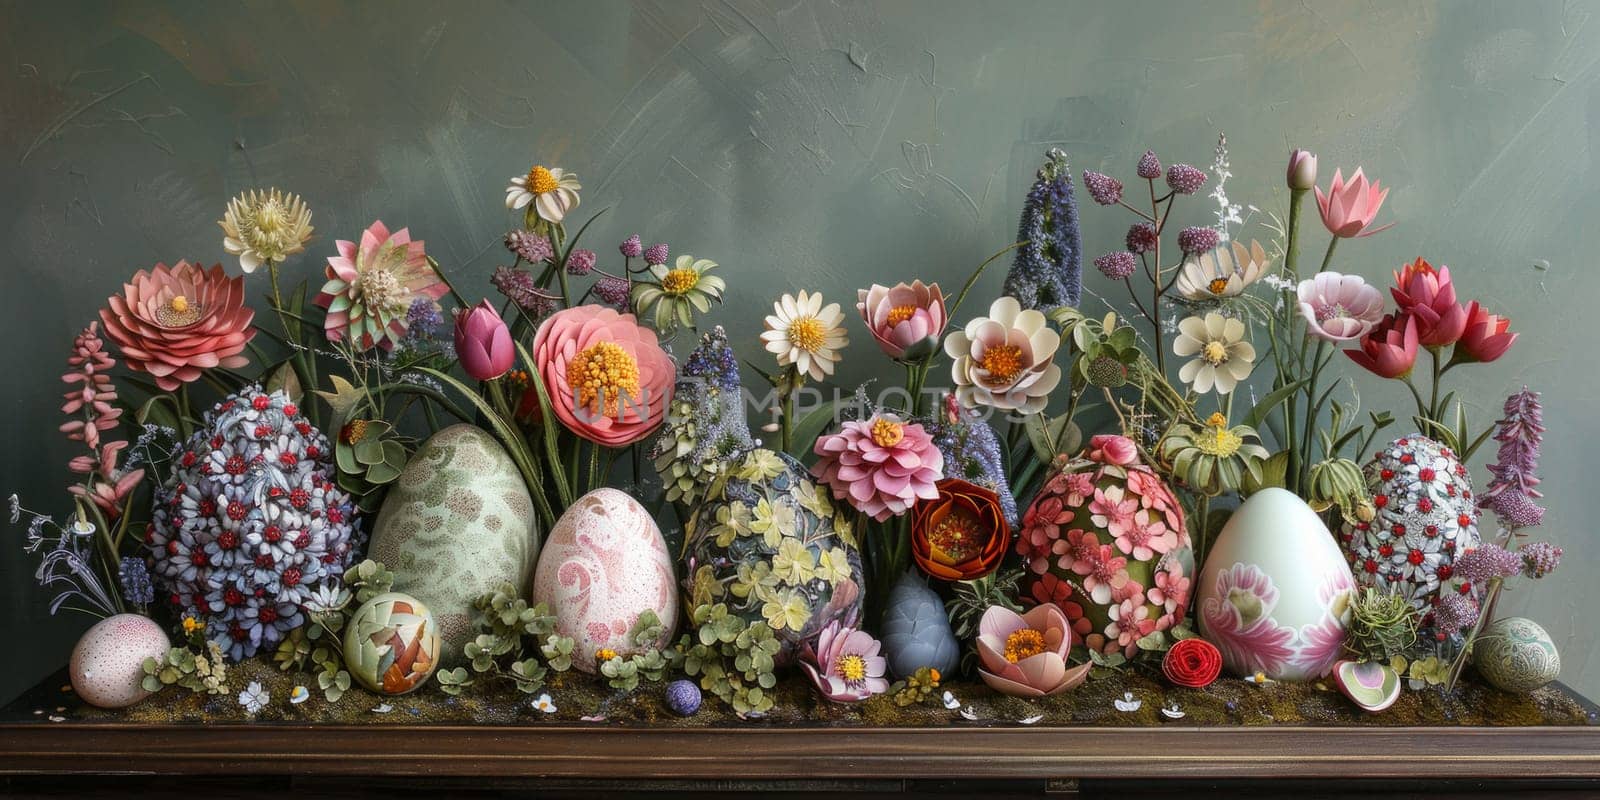 A vibrant painting featuring a variety of colorful flowers blooming next to delicate Easter eggs placed on a wooden table.